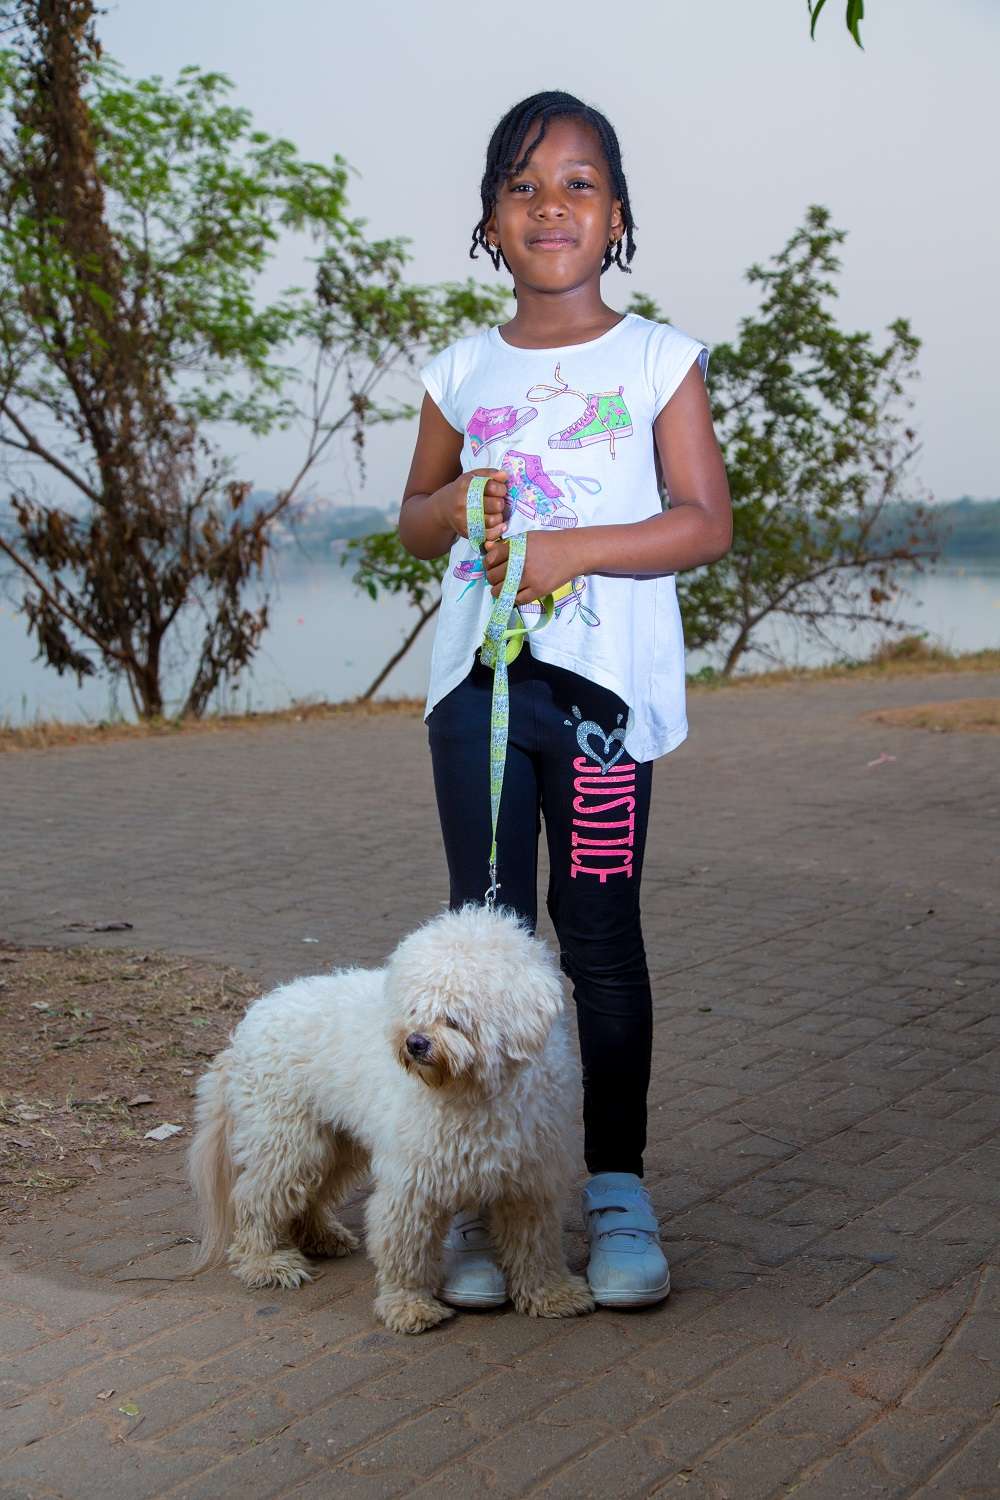 girl-standing-with-dog-image-from-tristetix.jpg